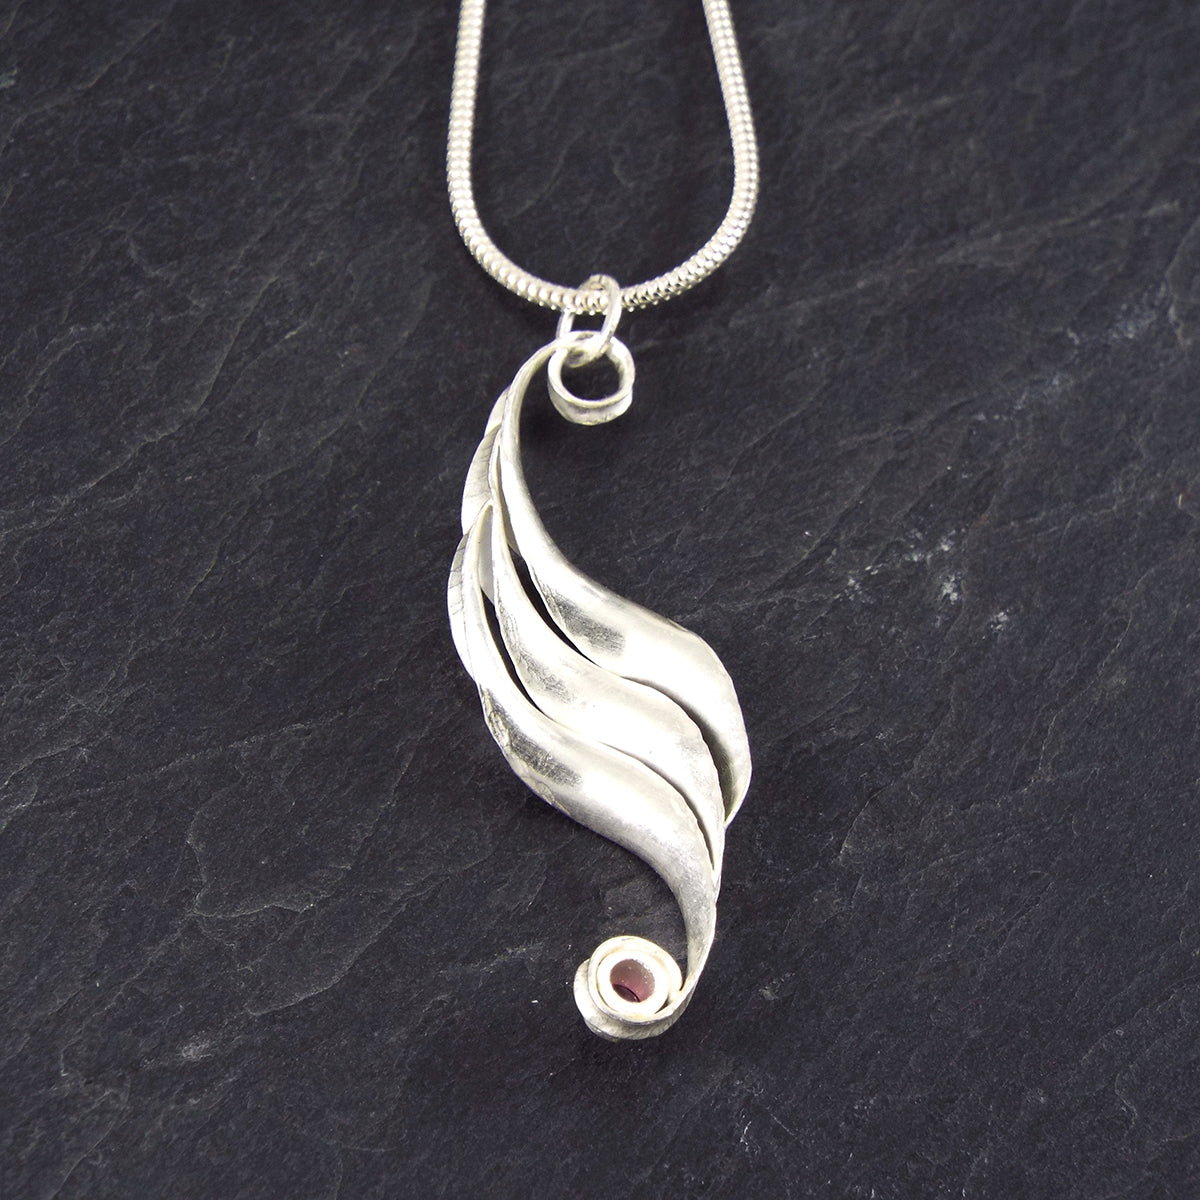 A silver wave necklace, handmade, composed of three curled and twisted units, the top one ending in a loop for the chain and the bottom one curled around a 3mm rhodolite garnet, faceted, magenta. The three units are arranged so that they form a progression. This is a back view.